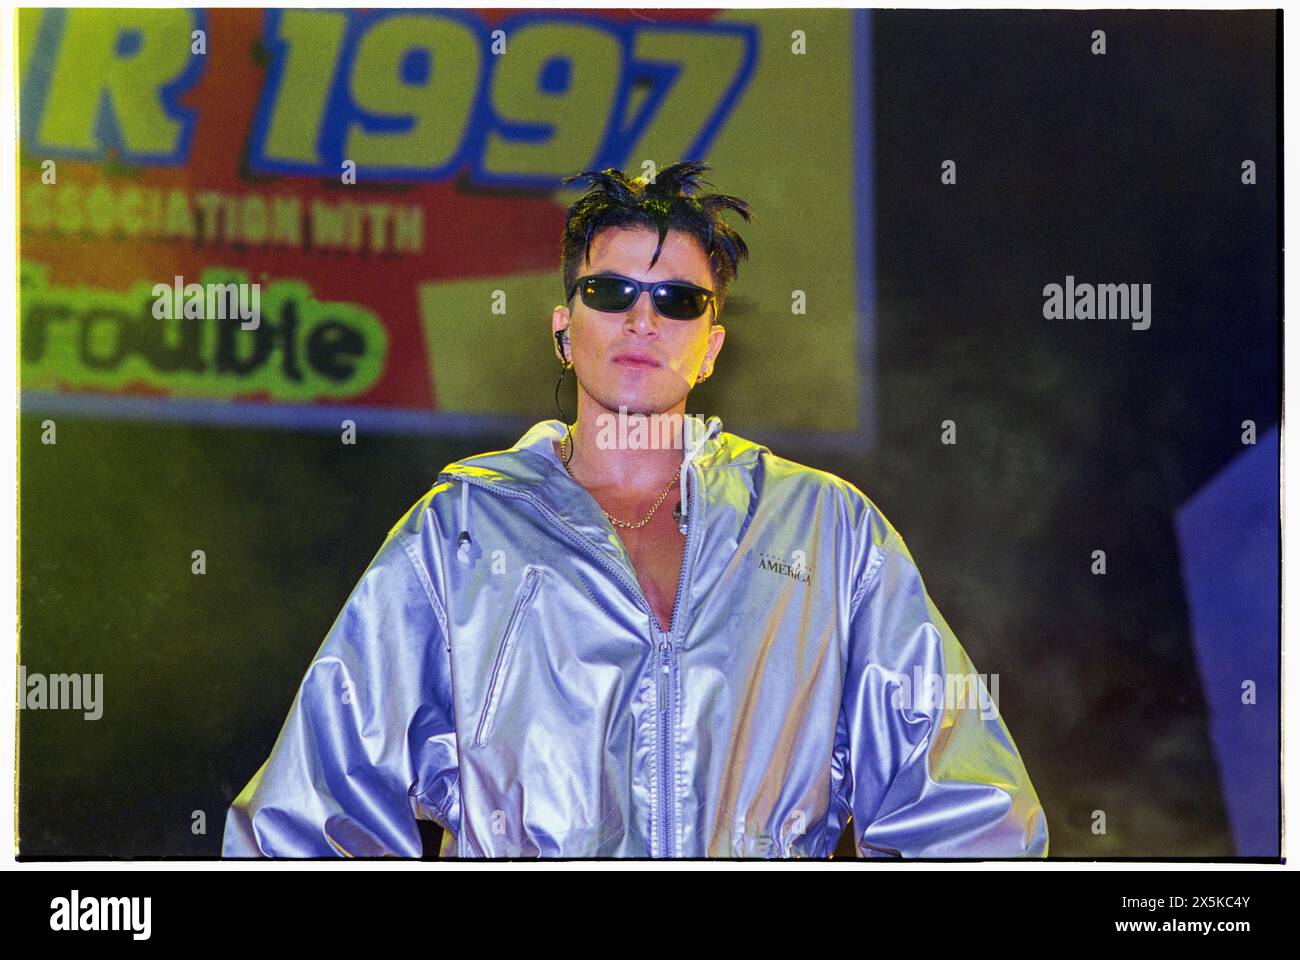 PETER ANDRE, YOUNG, 1997: A young Peter Andre on the 1997 Smash Hits Tour at Cardiff International Arena CIA, Cardiff, Wales, UK on 22 November 1997.  Photo: Rob Watkins. INFO:  Peter Andre, born on February 27, 1973, in Harrow, London, is a British-Australian singer, songwriter, and television personality. Rising to fame in the '90s, he has enjoyed success in music, reality television, and philanthropy. Stock Photo